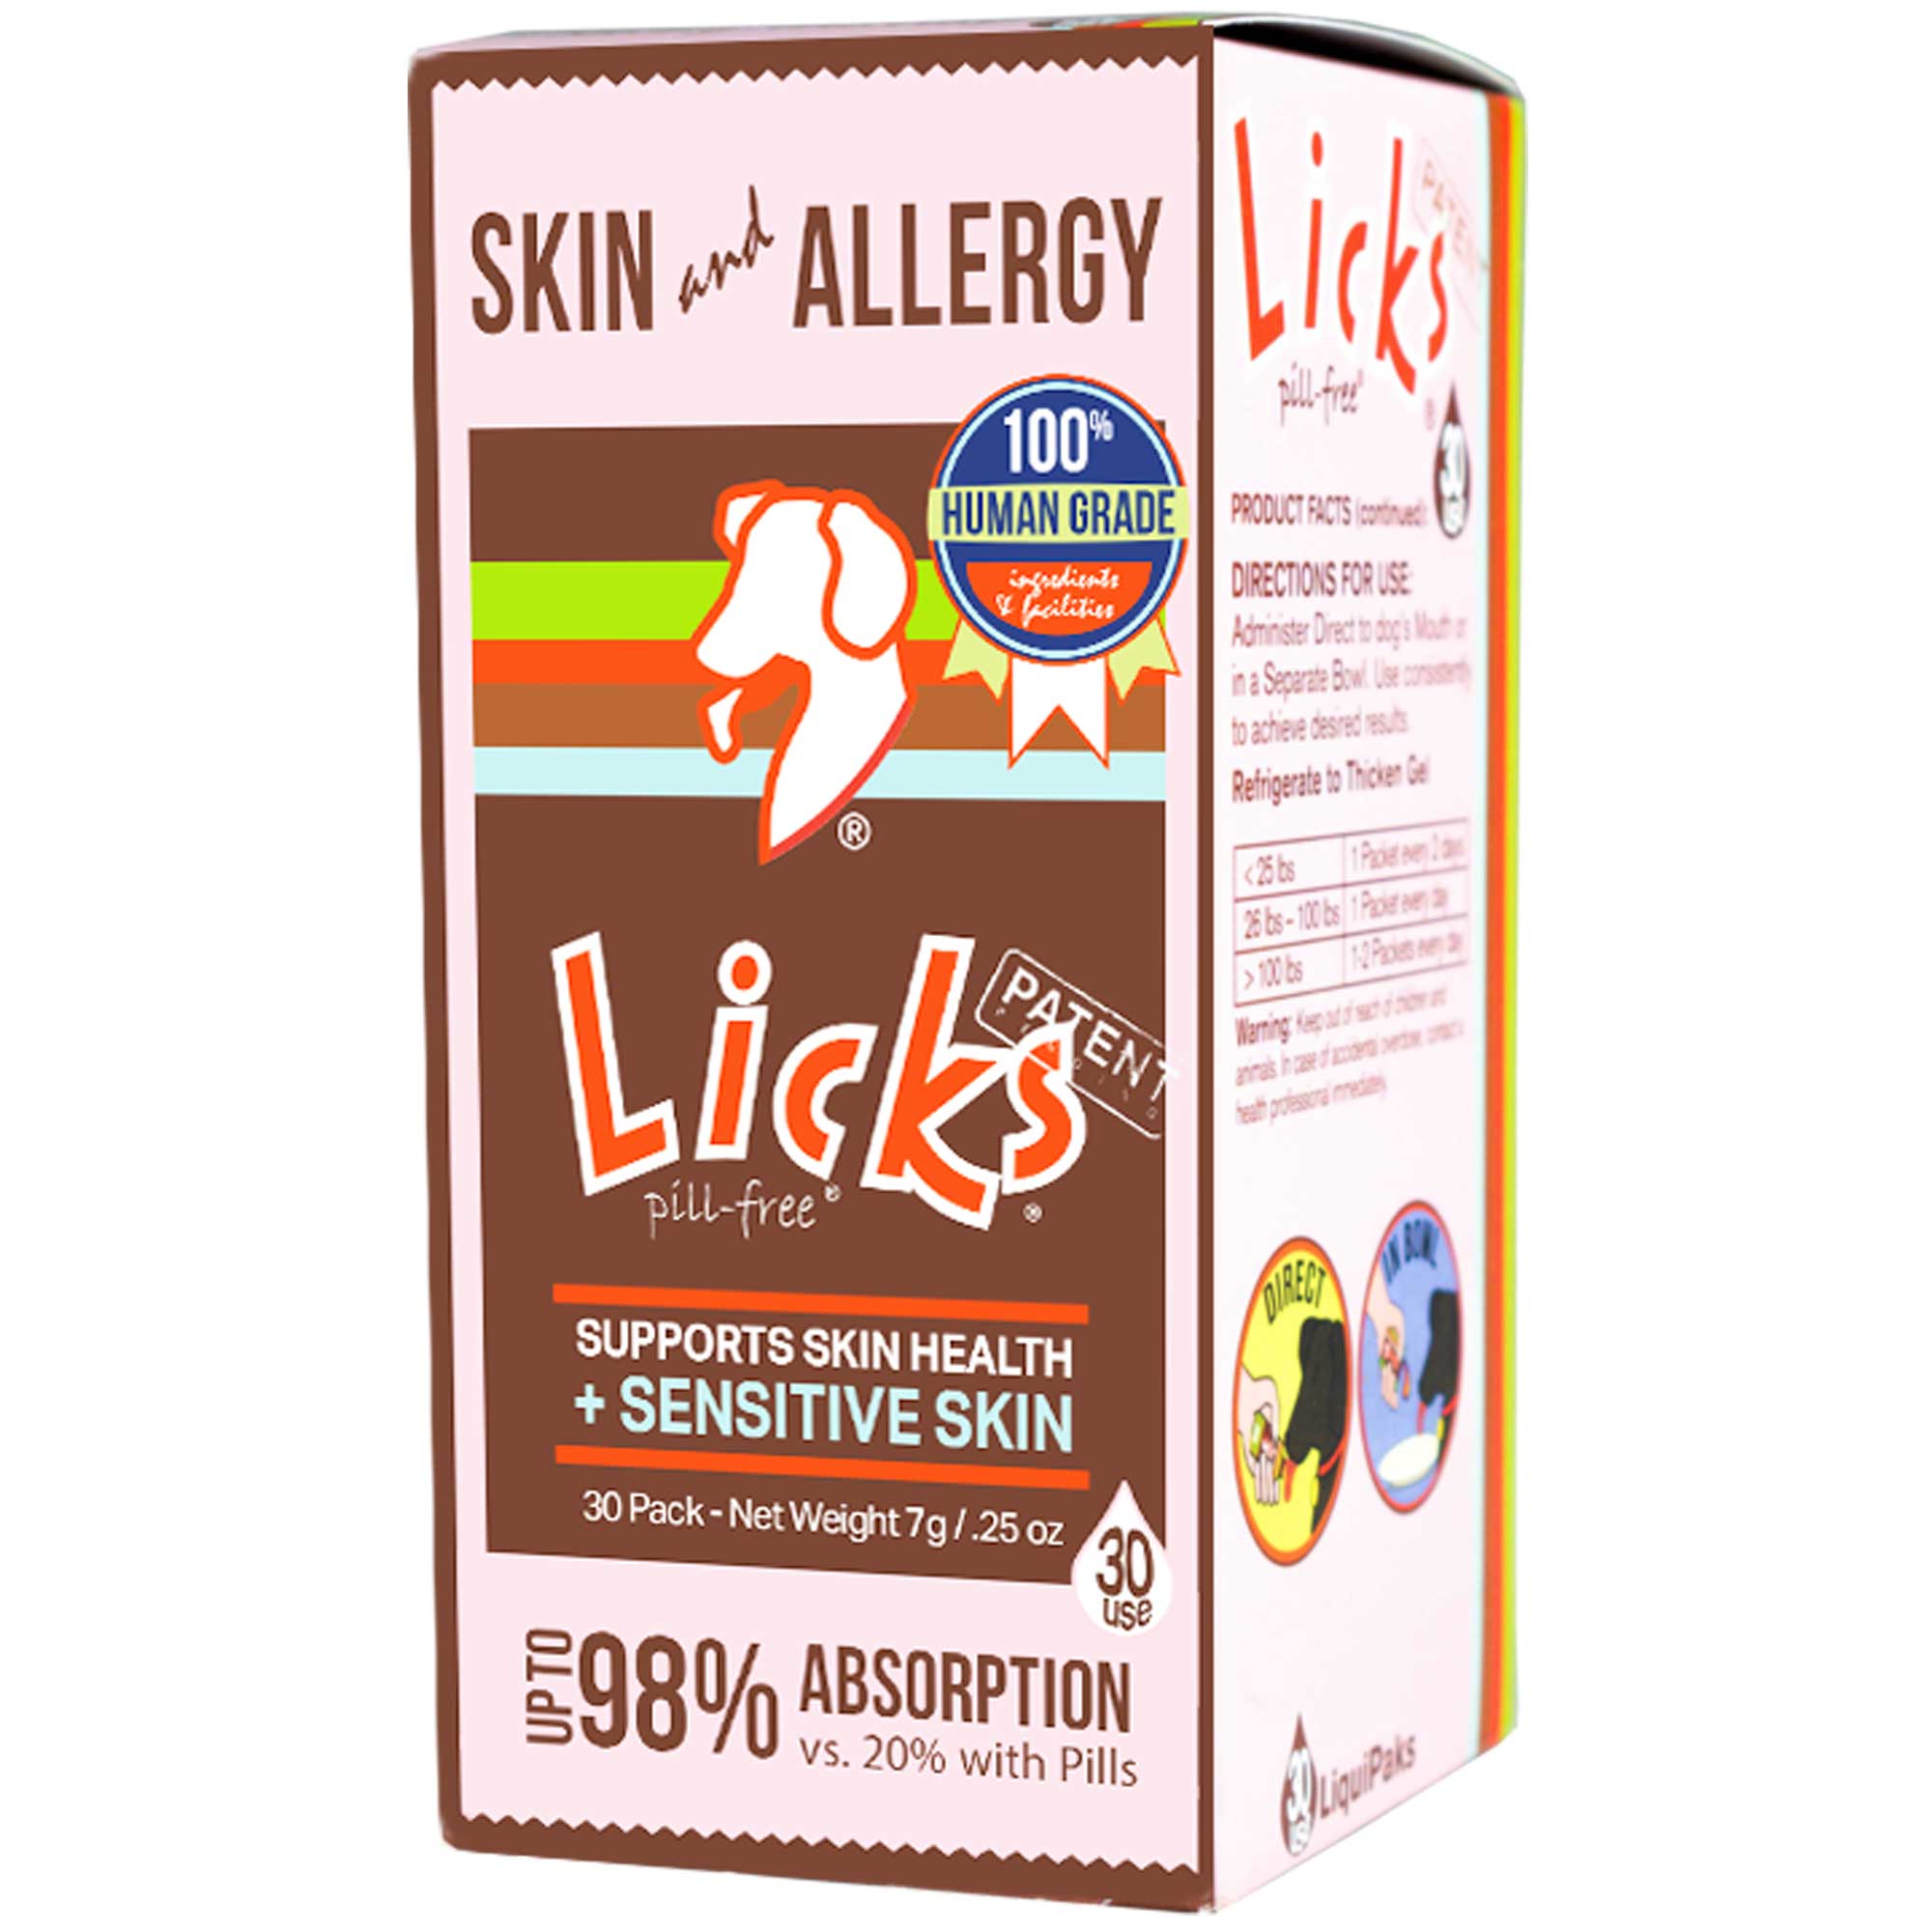 Licks Skin and Allergy Usage